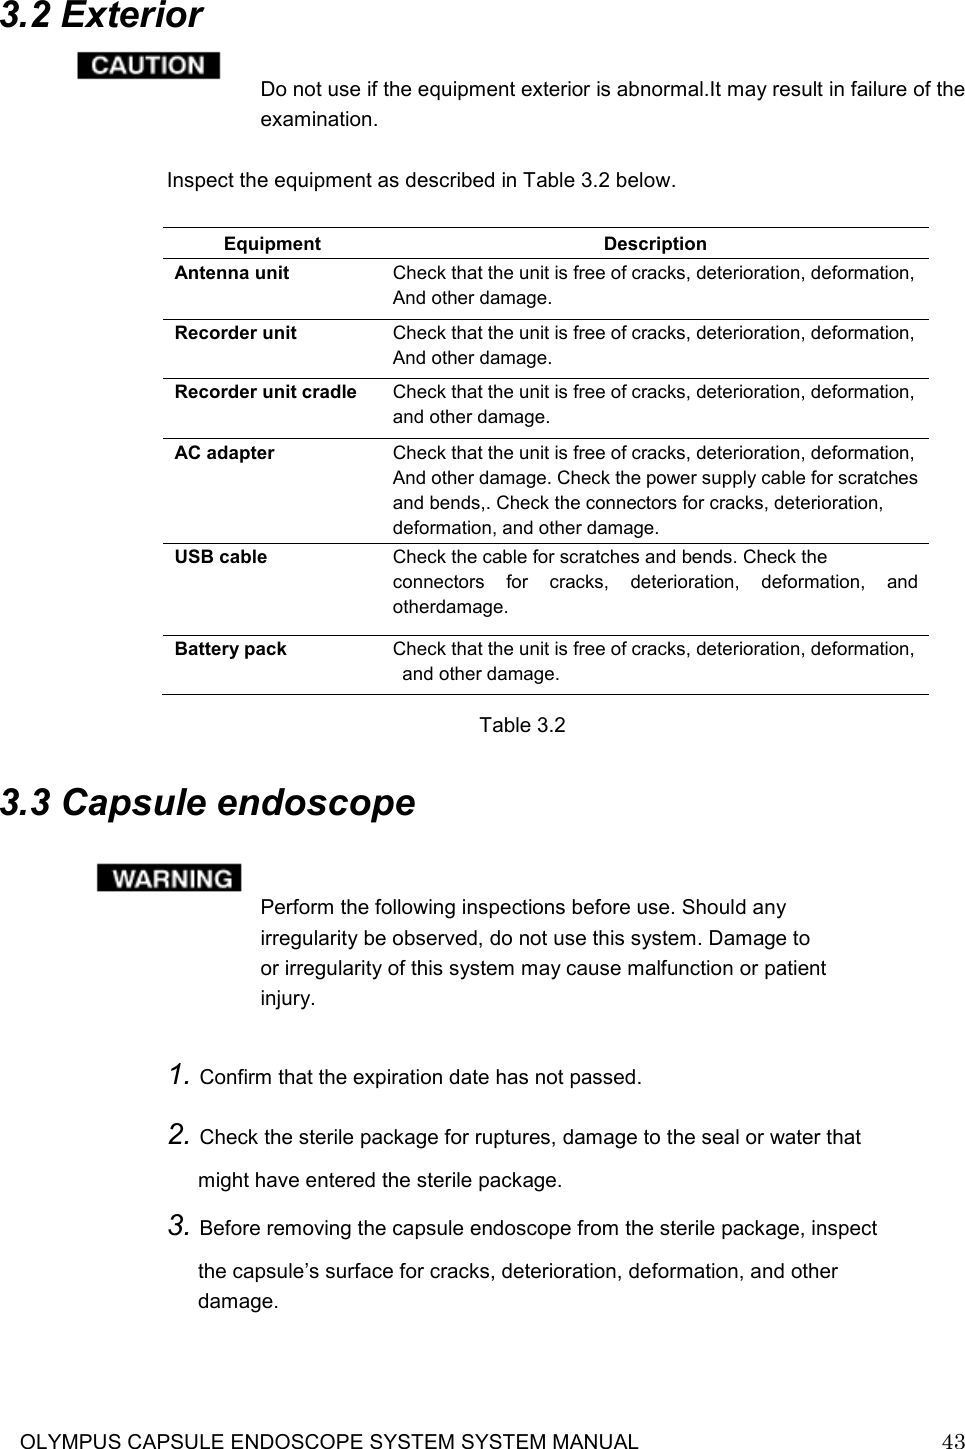     OLYMPUS CAPSULE ENDOSCOPE SYSTEM SYSTEM MANUAL                            43   3.2 Exterior  Do not use if the equipment exterior is abnormal.It may result in failure of the examination.  Inspect the equipment as described in Table 3.2 below.                  Table 3.2  3.3 Capsule endoscope   Perform the following inspections before use. Should any irregularity be observed, do not use this system. Damage to or irregularity of this system may cause malfunction or patient injury.  1. Confirm that the expiration date has not passed. 2. Check the sterile package for ruptures, damage to the seal or water that might have entered the sterile package. 3. Before removing the capsule endoscope from the sterile package, inspect the capsule’s surface for cracks, deterioration, deformation, and other damage.    Equipment  Description Antenna unit    Check that the unit is free of cracks, deterioration, deformation, And other damage. Recorder unit  Check that the unit is free of cracks, deterioration, deformation, And other damage. Recorder unit cradle  Check that the unit is free of cracks, deterioration, deformation,  and other damage.   AC adapter  Check that the unit is free of cracks, deterioration, deformation, And other damage. Check the power supply cable for scratches and bends,. Check the connectors for cracks, deterioration,   deformation, and other damage. USB cable  Check the cable for scratches and bends. Check the connectors  for  cracks,  deterioration,  deformation,  and otherdamage. Battery pack  Check that the unit is free of cracks, deterioration, deformation,  and other damage. 